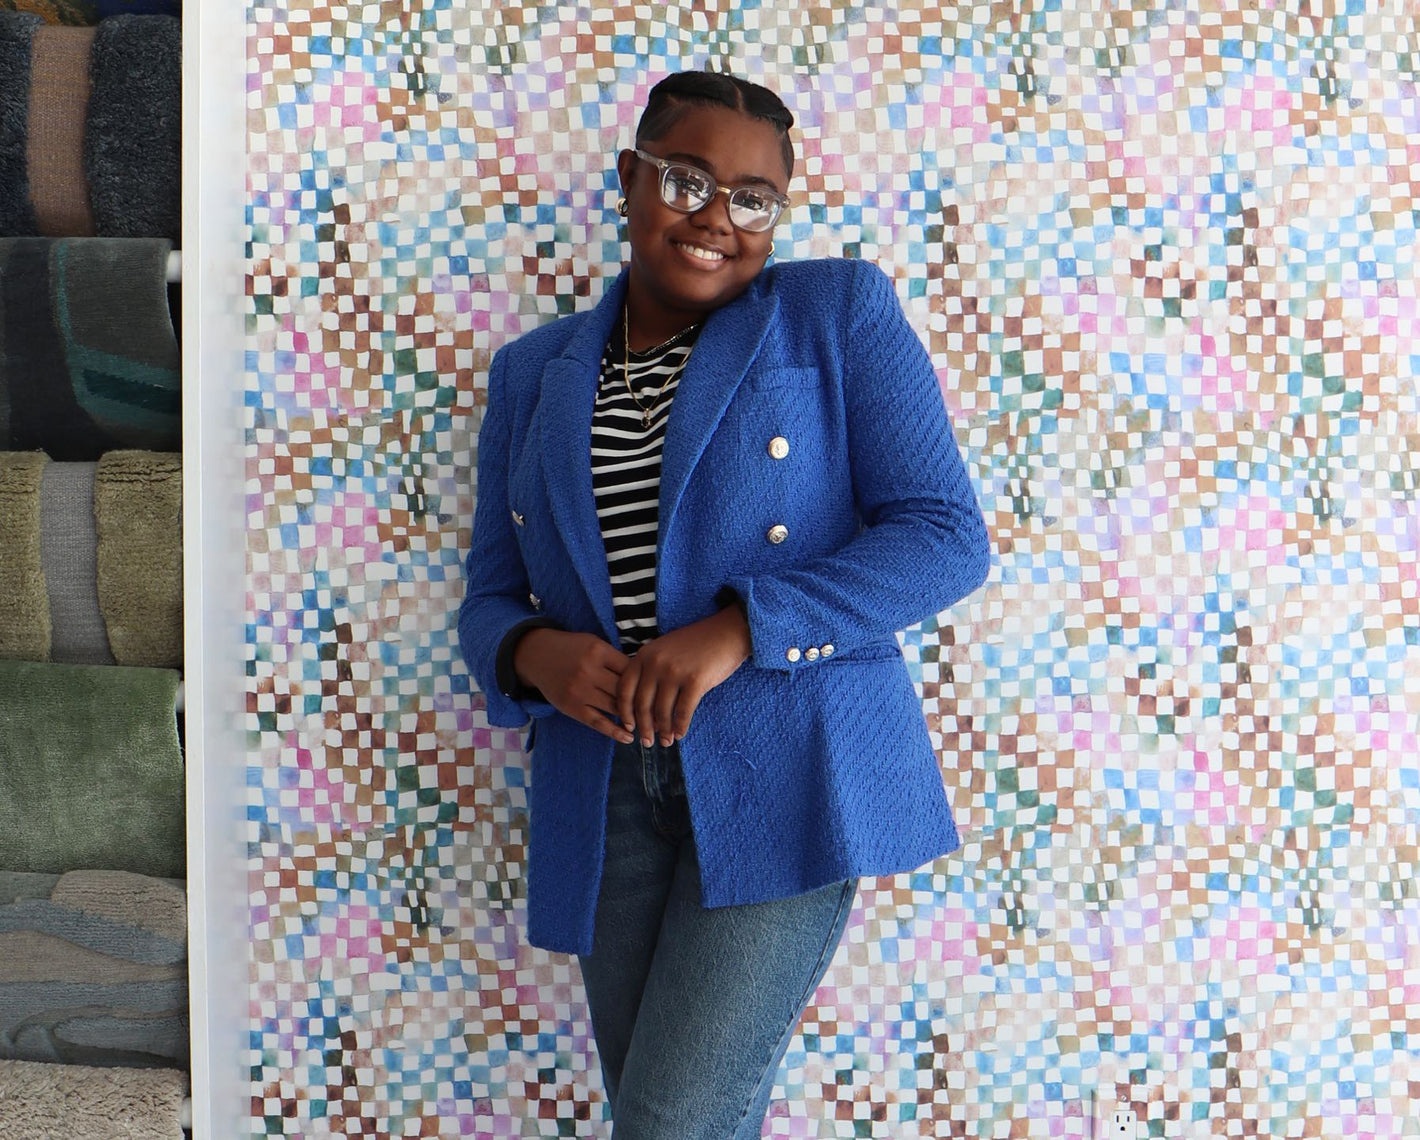 A woman in a blue blazer standing in front of a wall